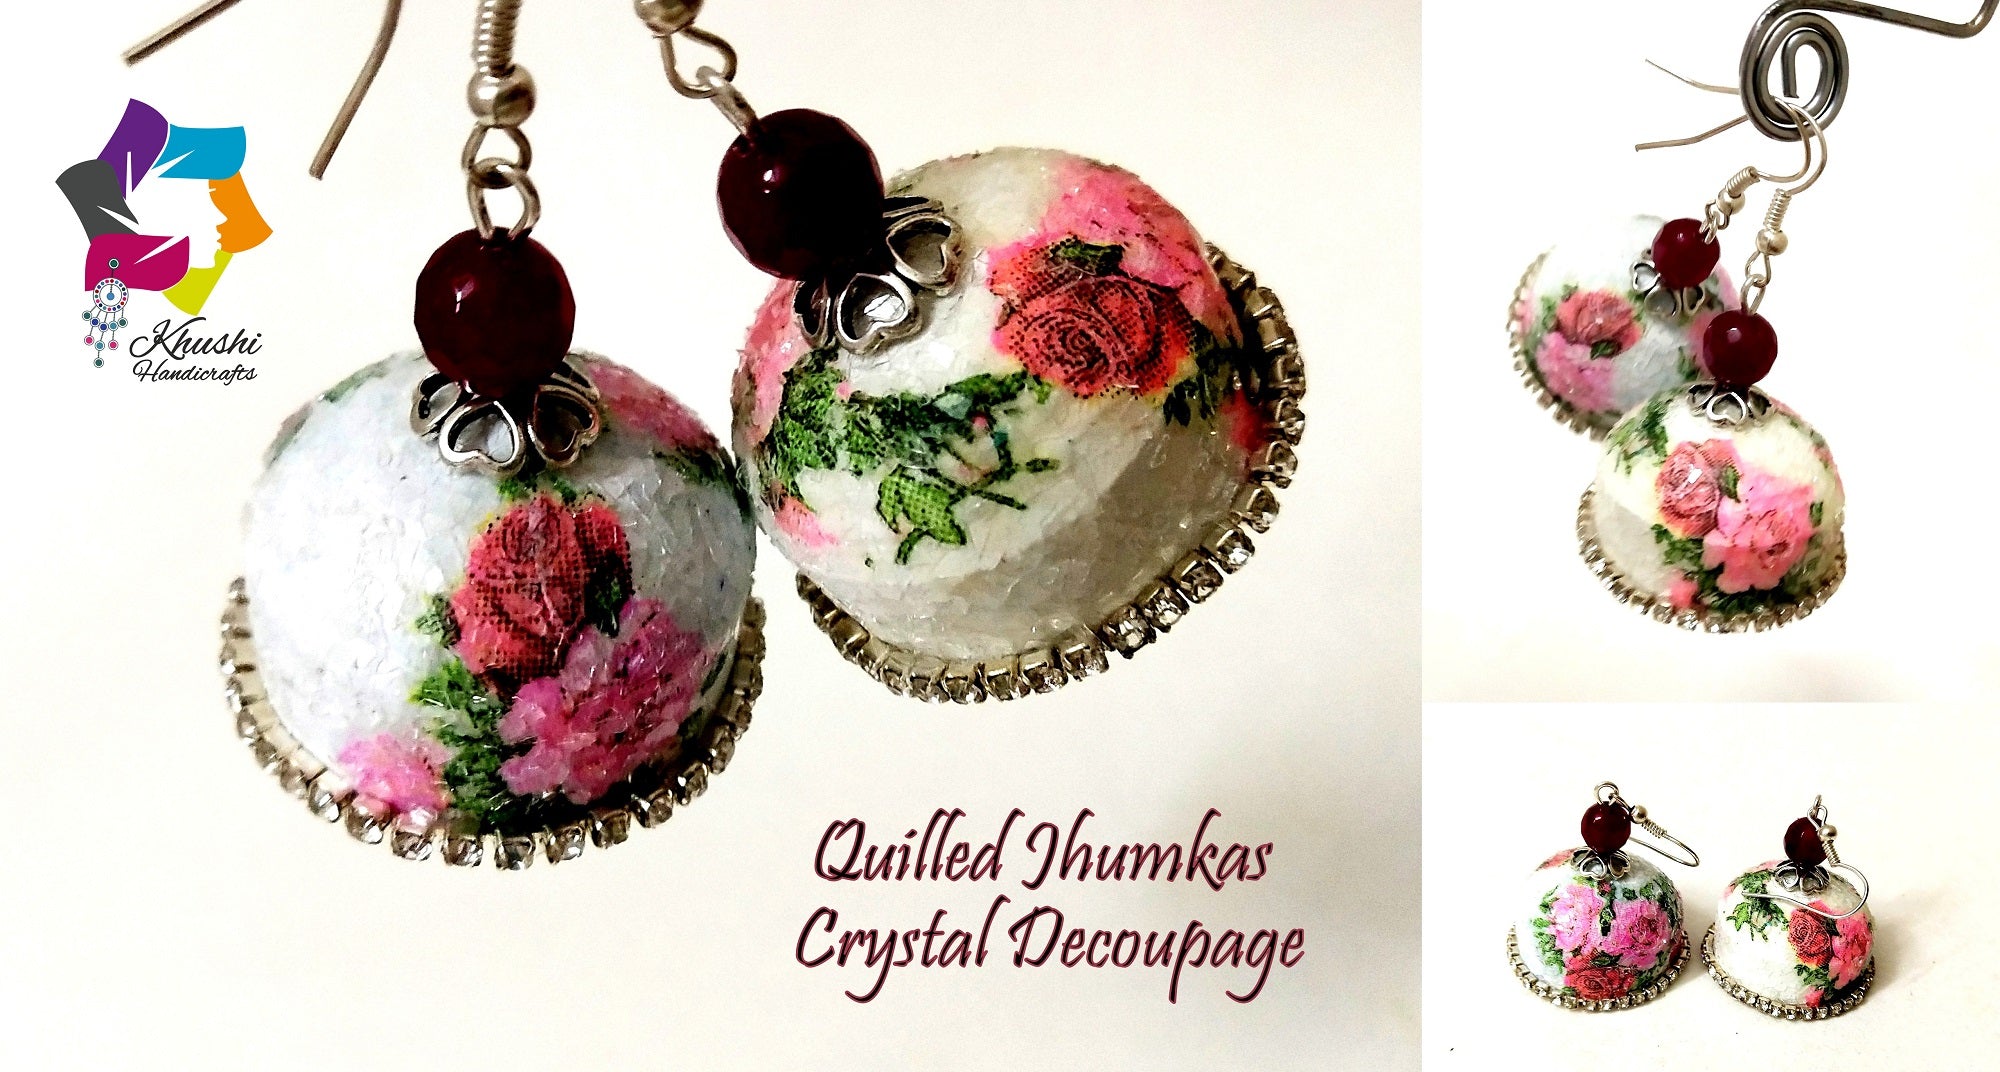 Crystal Decoupage Quilling jhumka